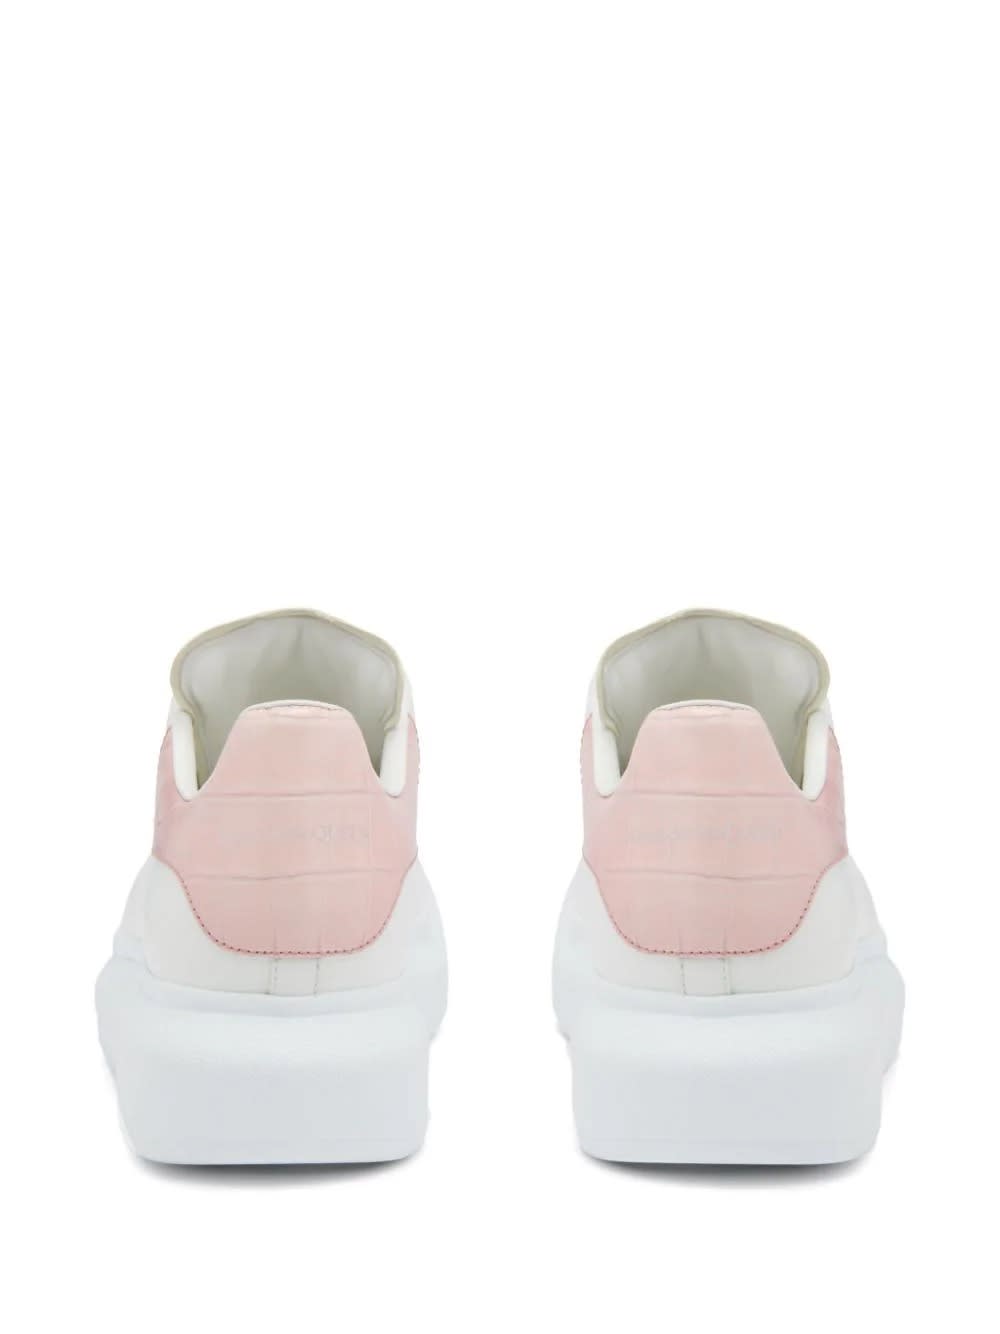 Shop Alexander Mcqueen Oversized Sneakers In White And Clay With Crocodile Effect Spoiler